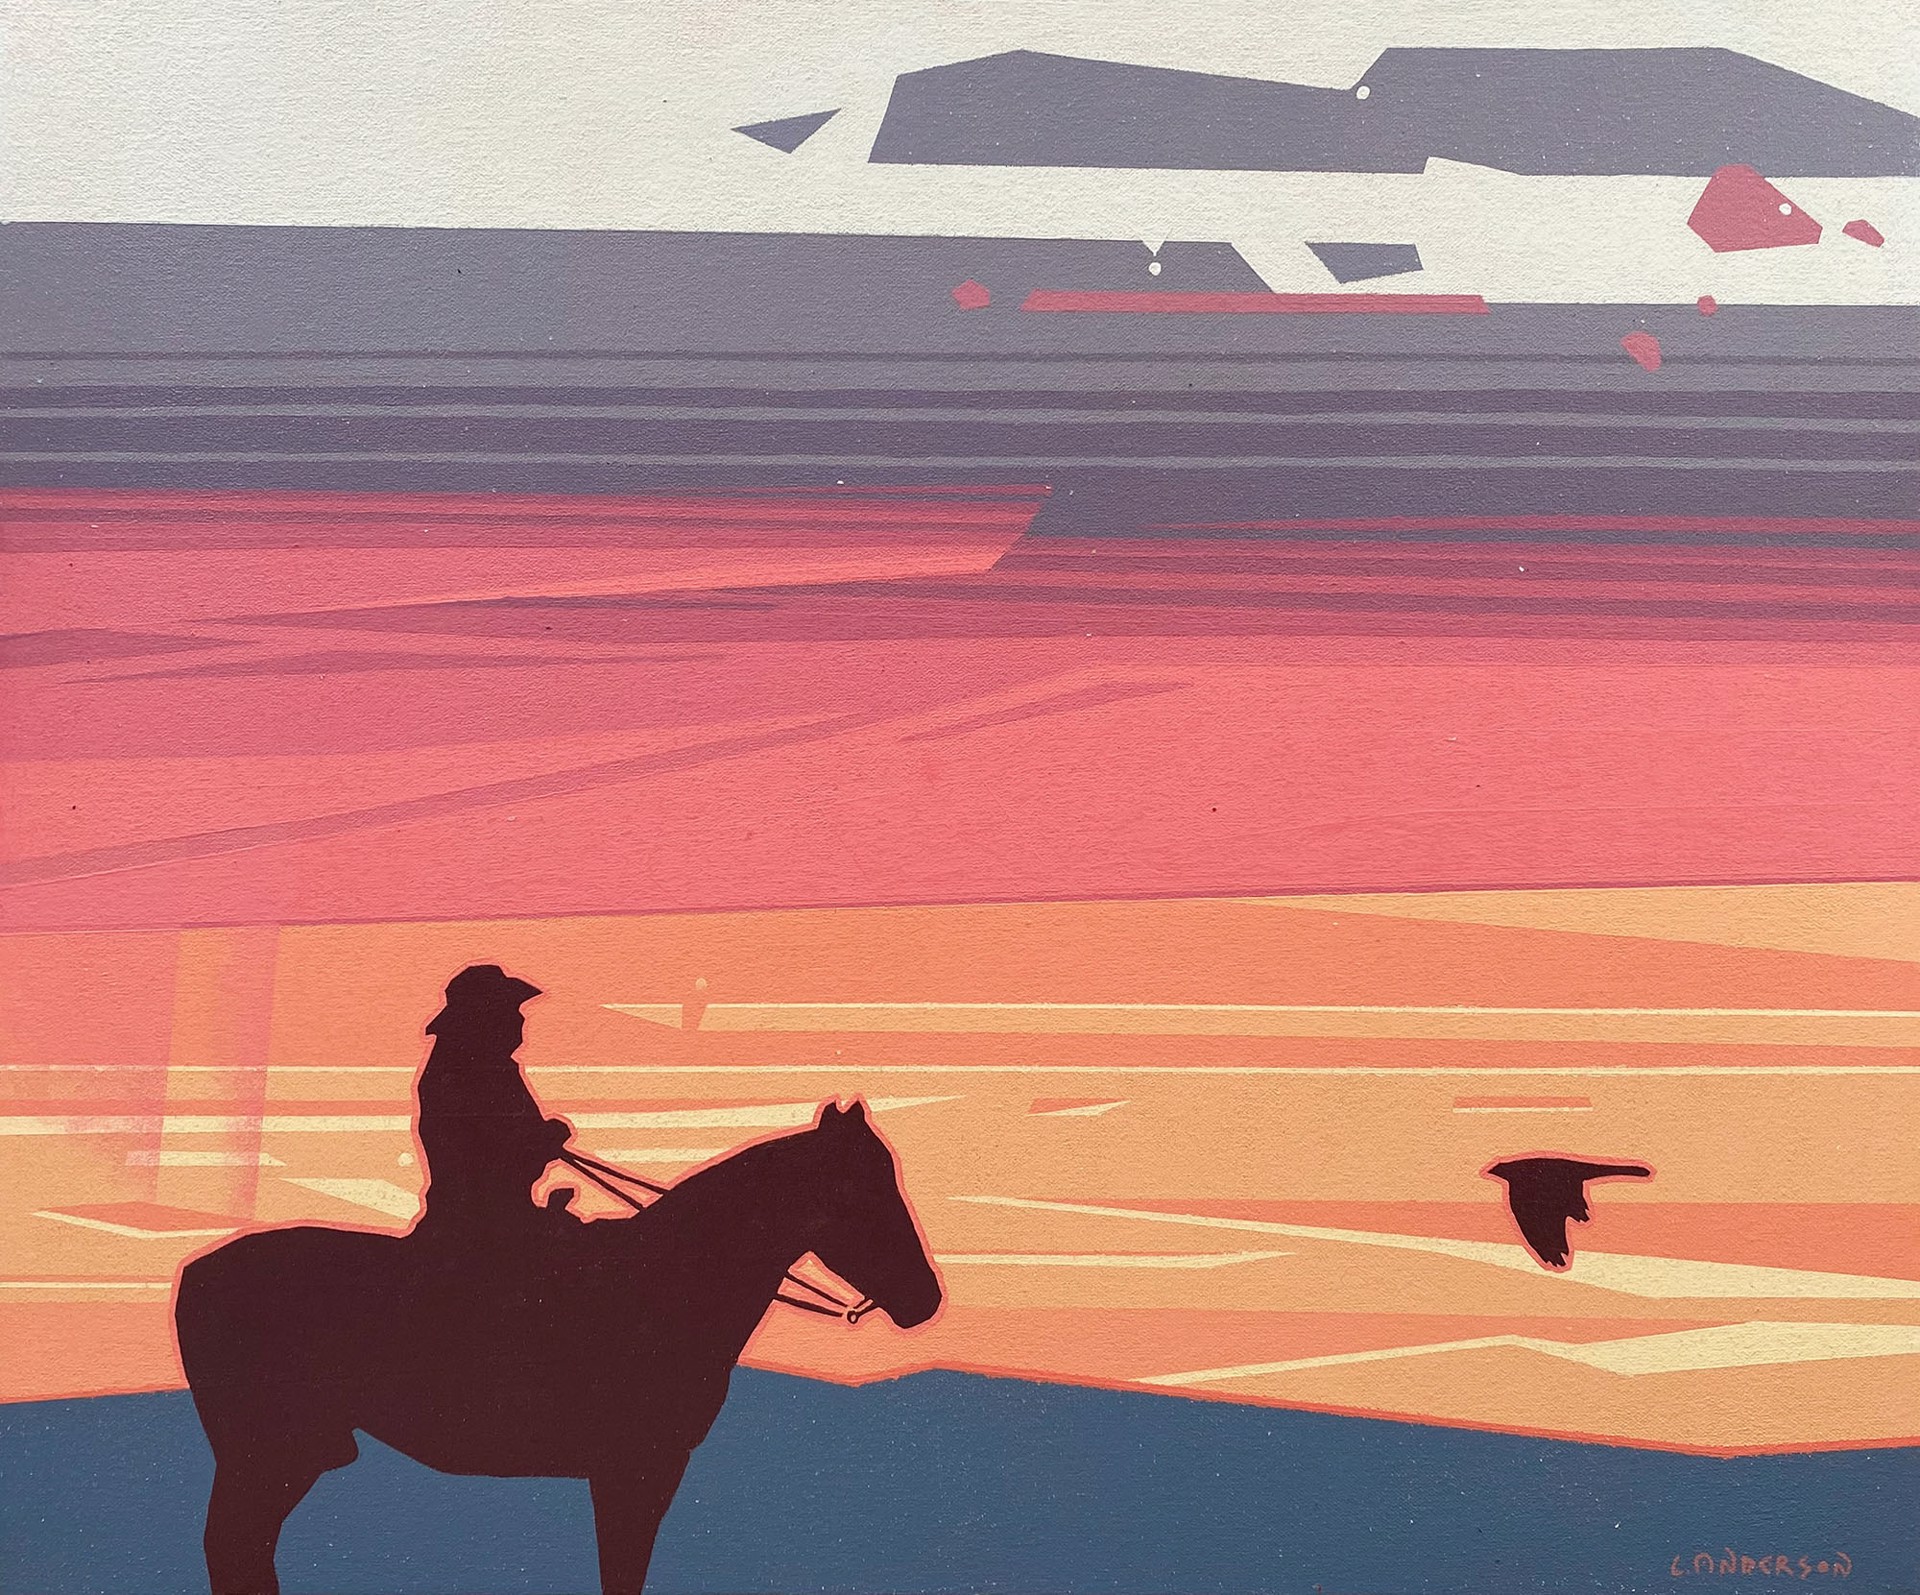 Original Painting By Luke Anderson Featuring A Silhouette Of A Cowboy On Horseback Against Graphic Gradient Sunset Landscape